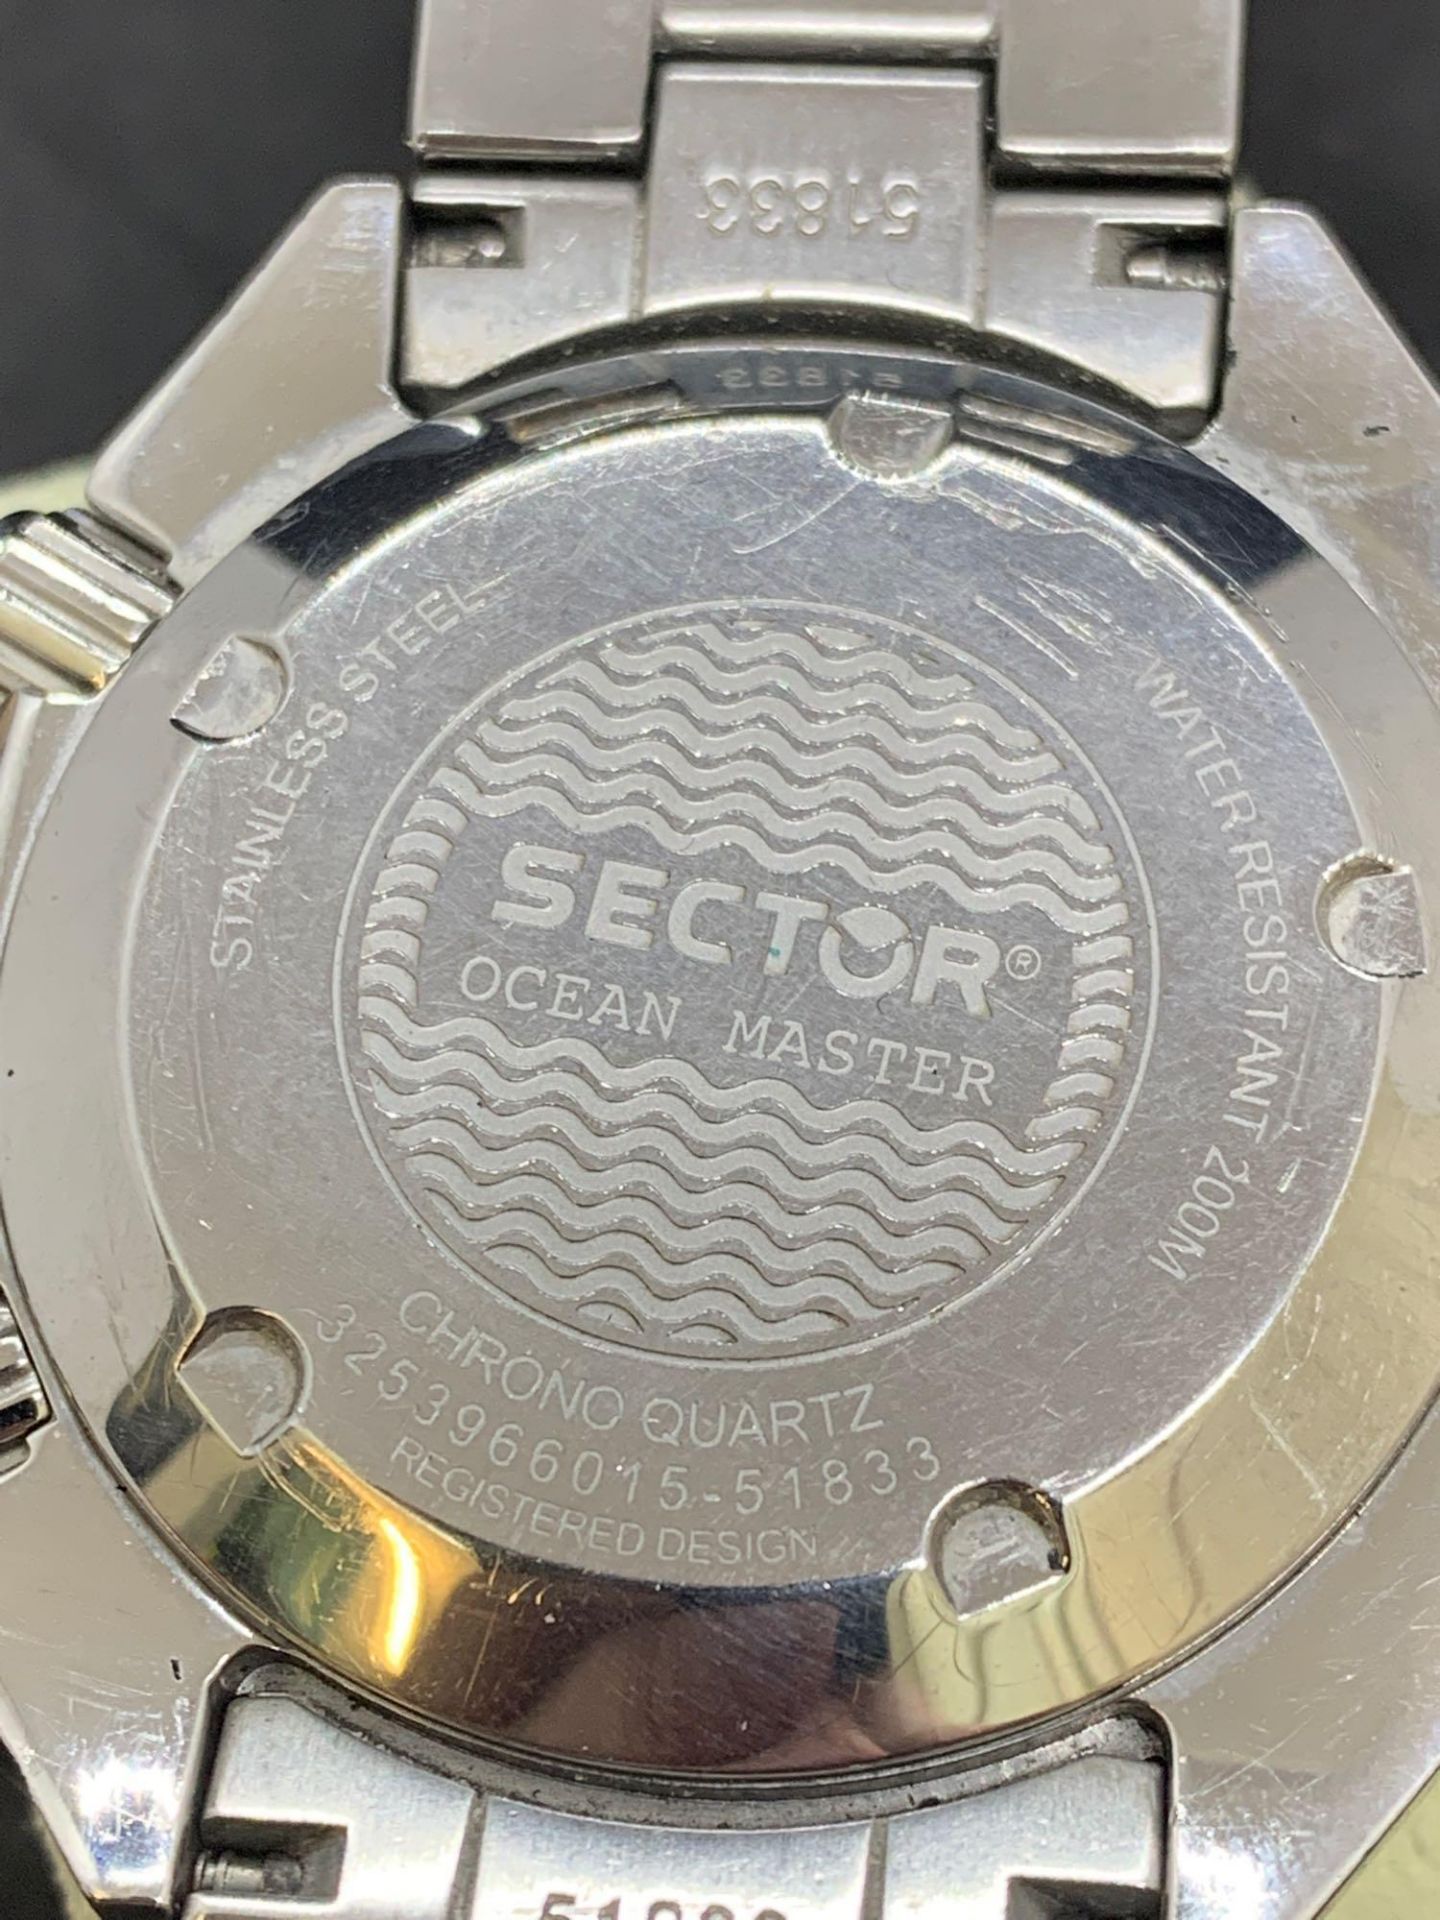 Sector 45 mm stainless steel ocean master watch no crown Strap needs a pin - Image 4 of 5